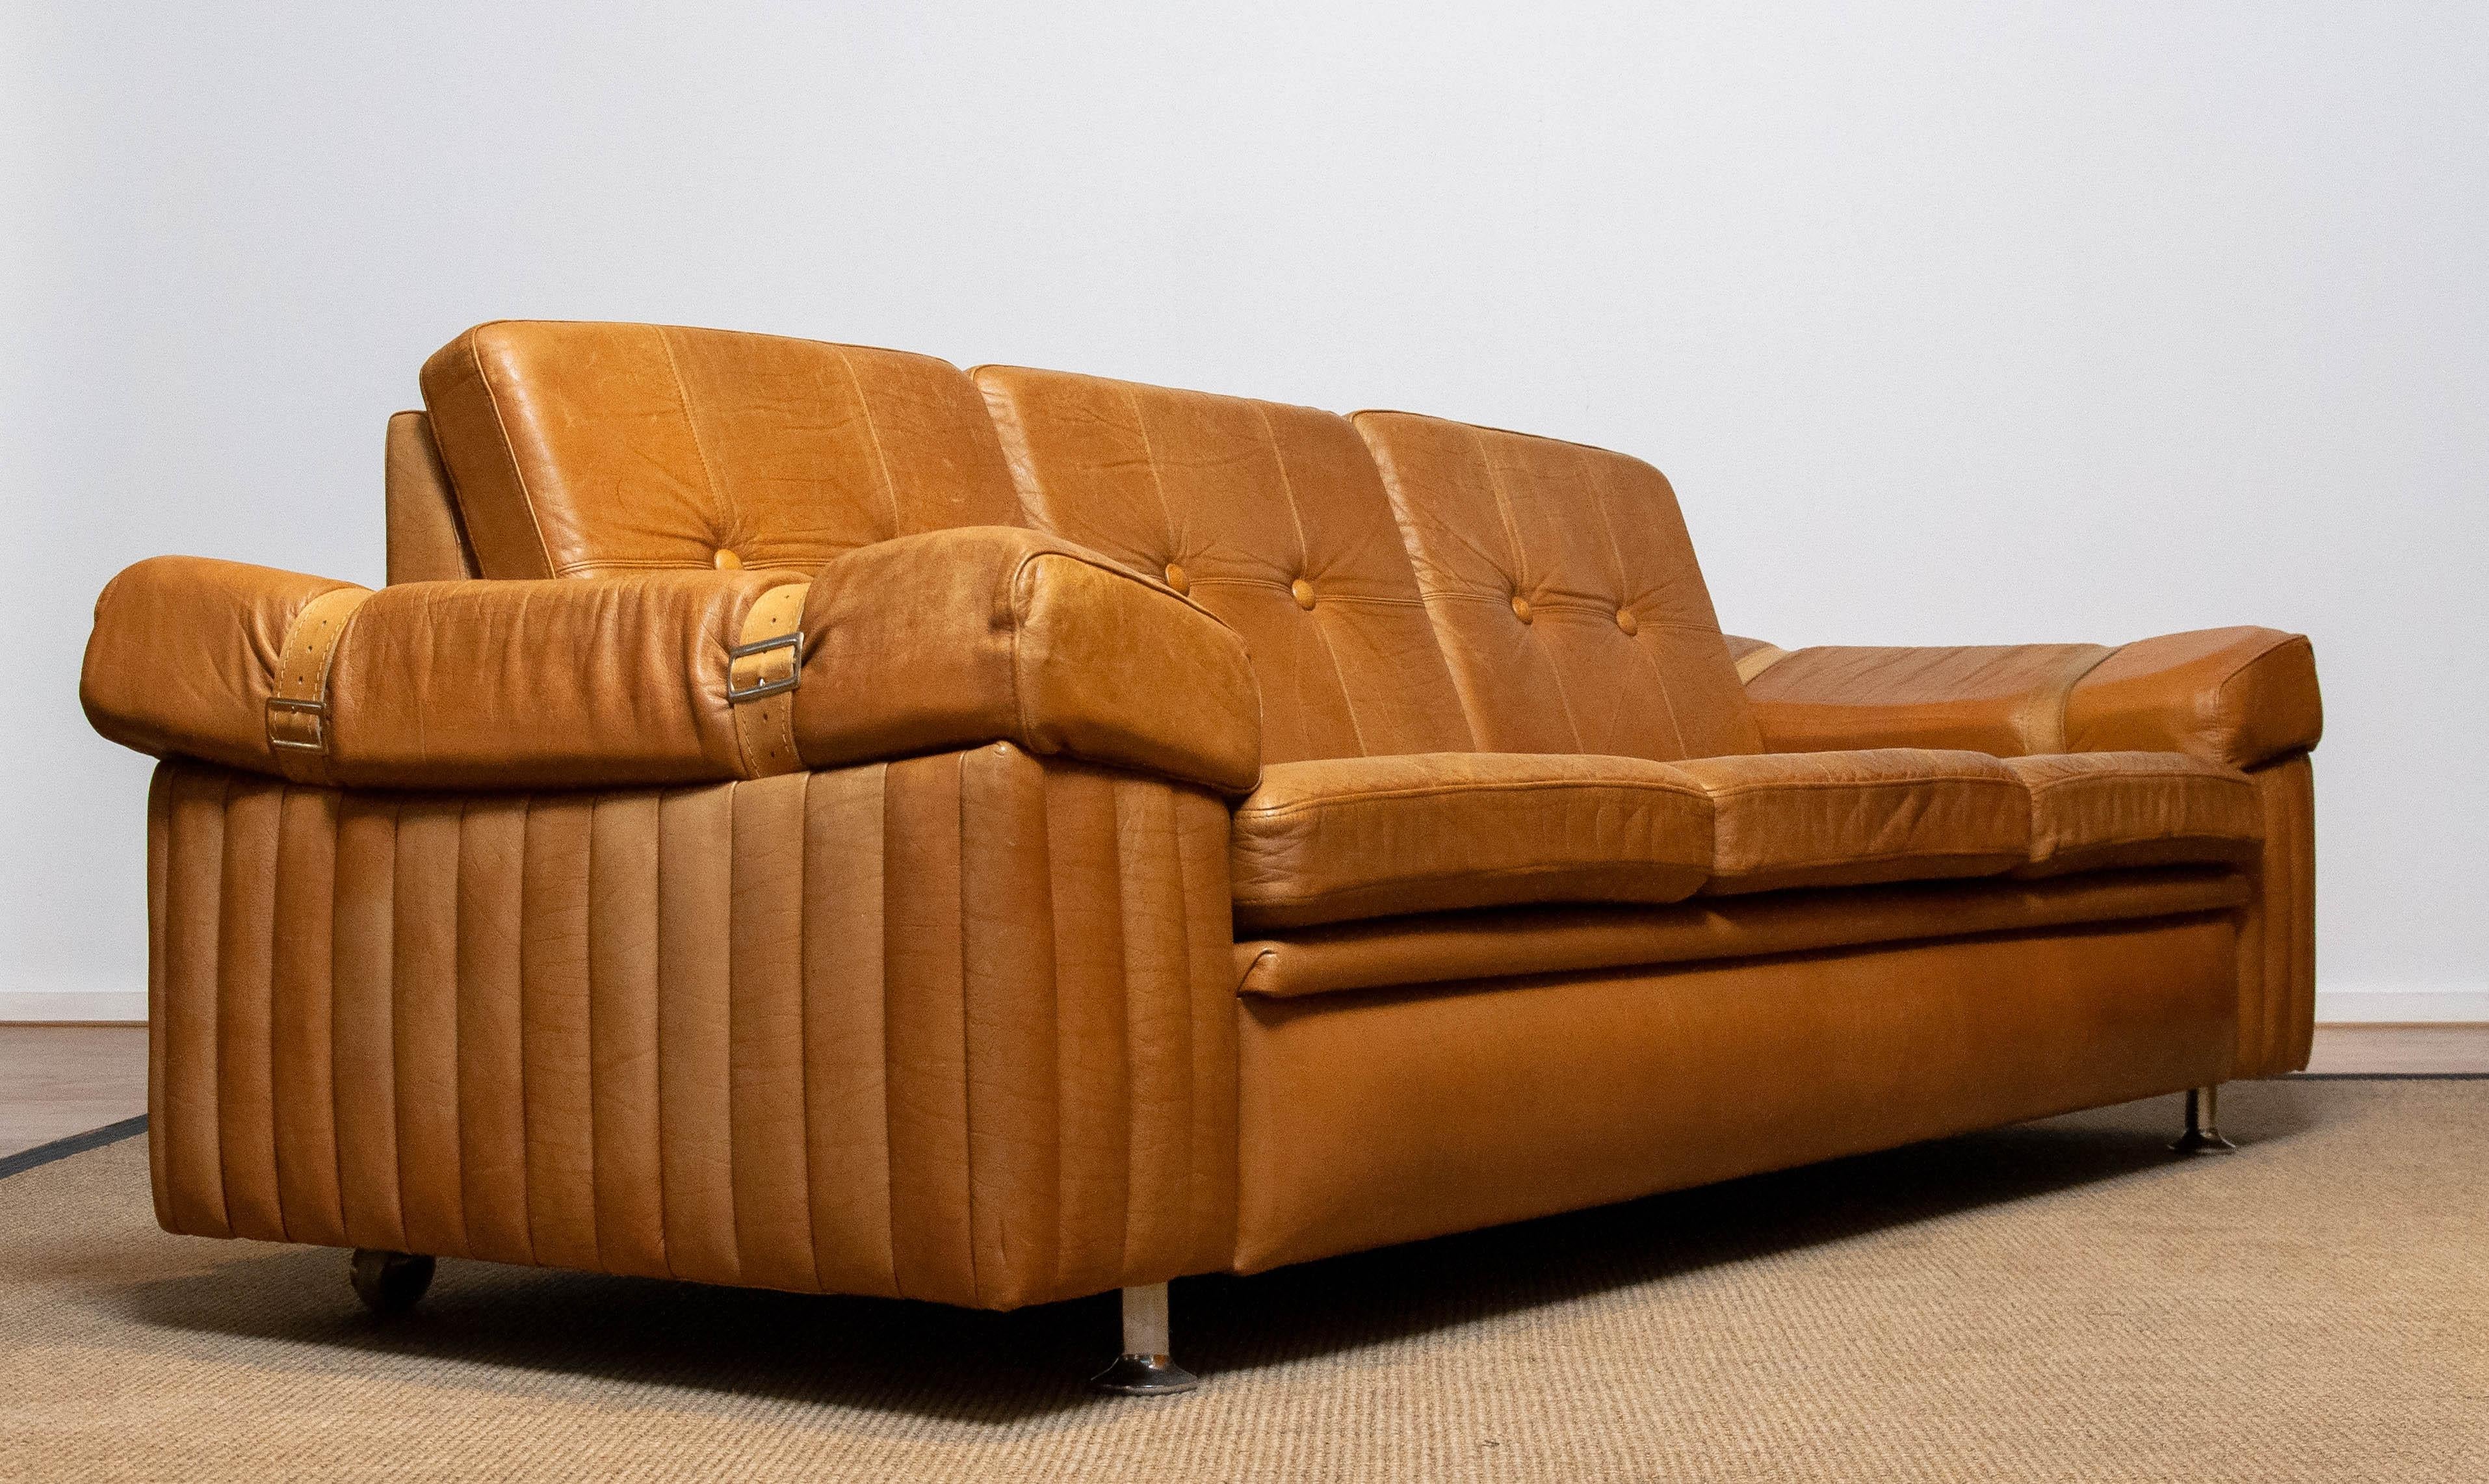 1970s Scandinavian Brutalist Three-Seater Low-Back Sofa in Camel Colored Leather For Sale 3